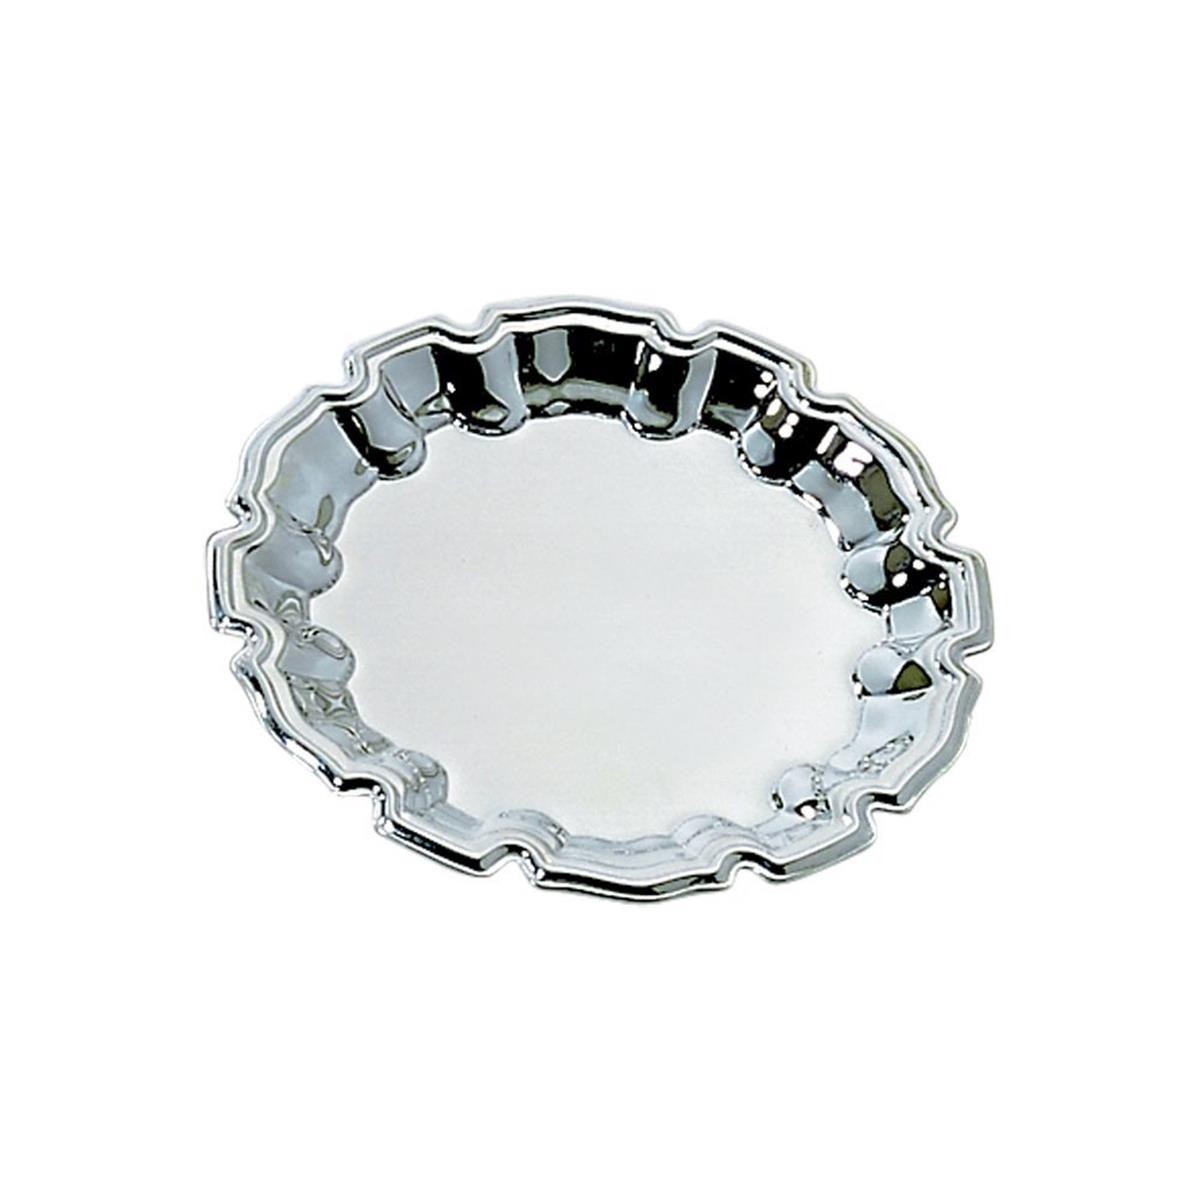 025104 12 In. Stainless Steel Chippendale Tray